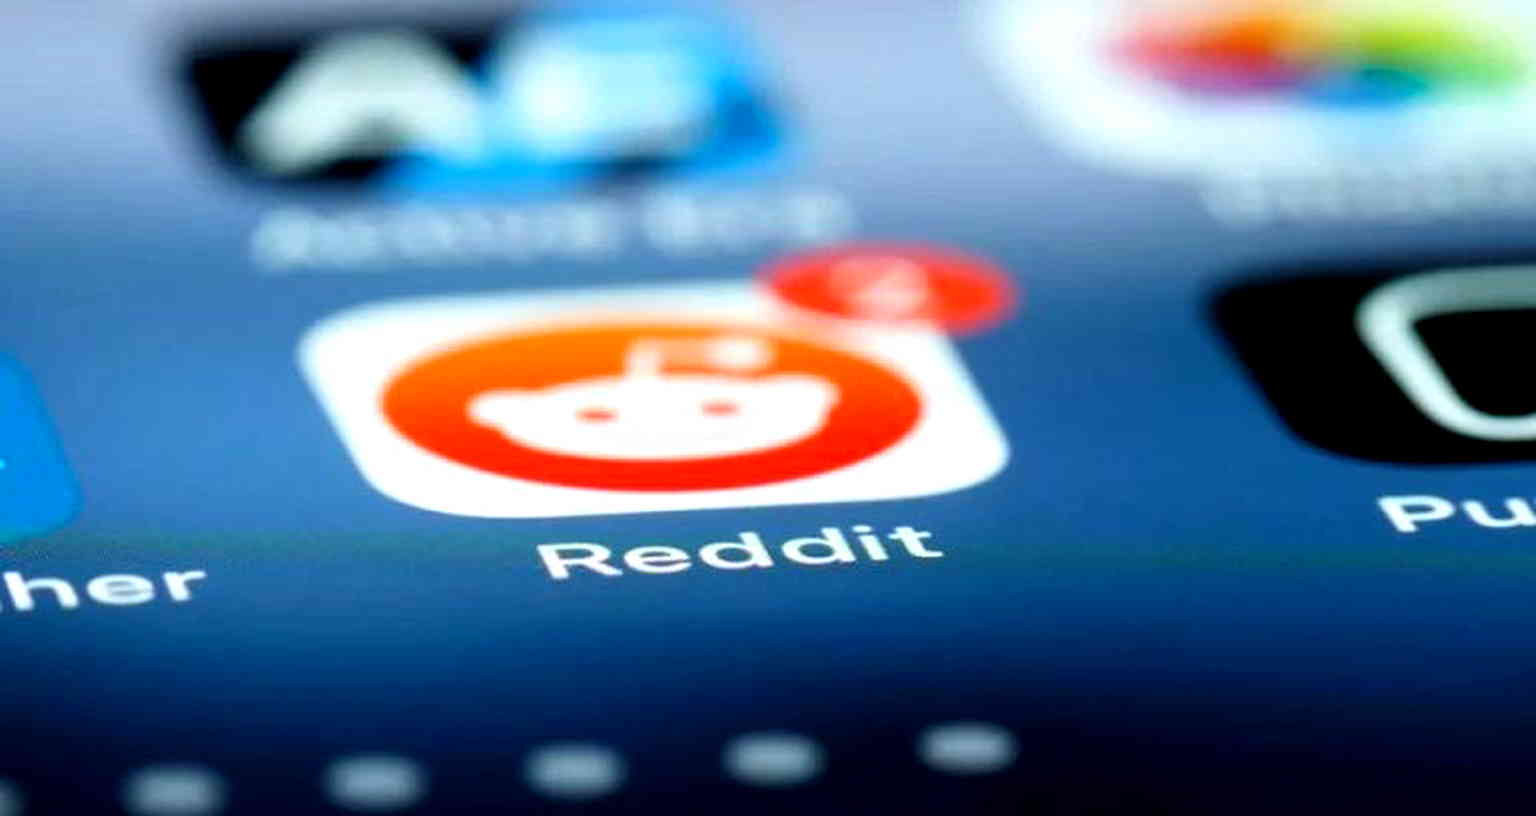 Explicit photos, videos of South Asian women traded in Reddit forum, report reveals